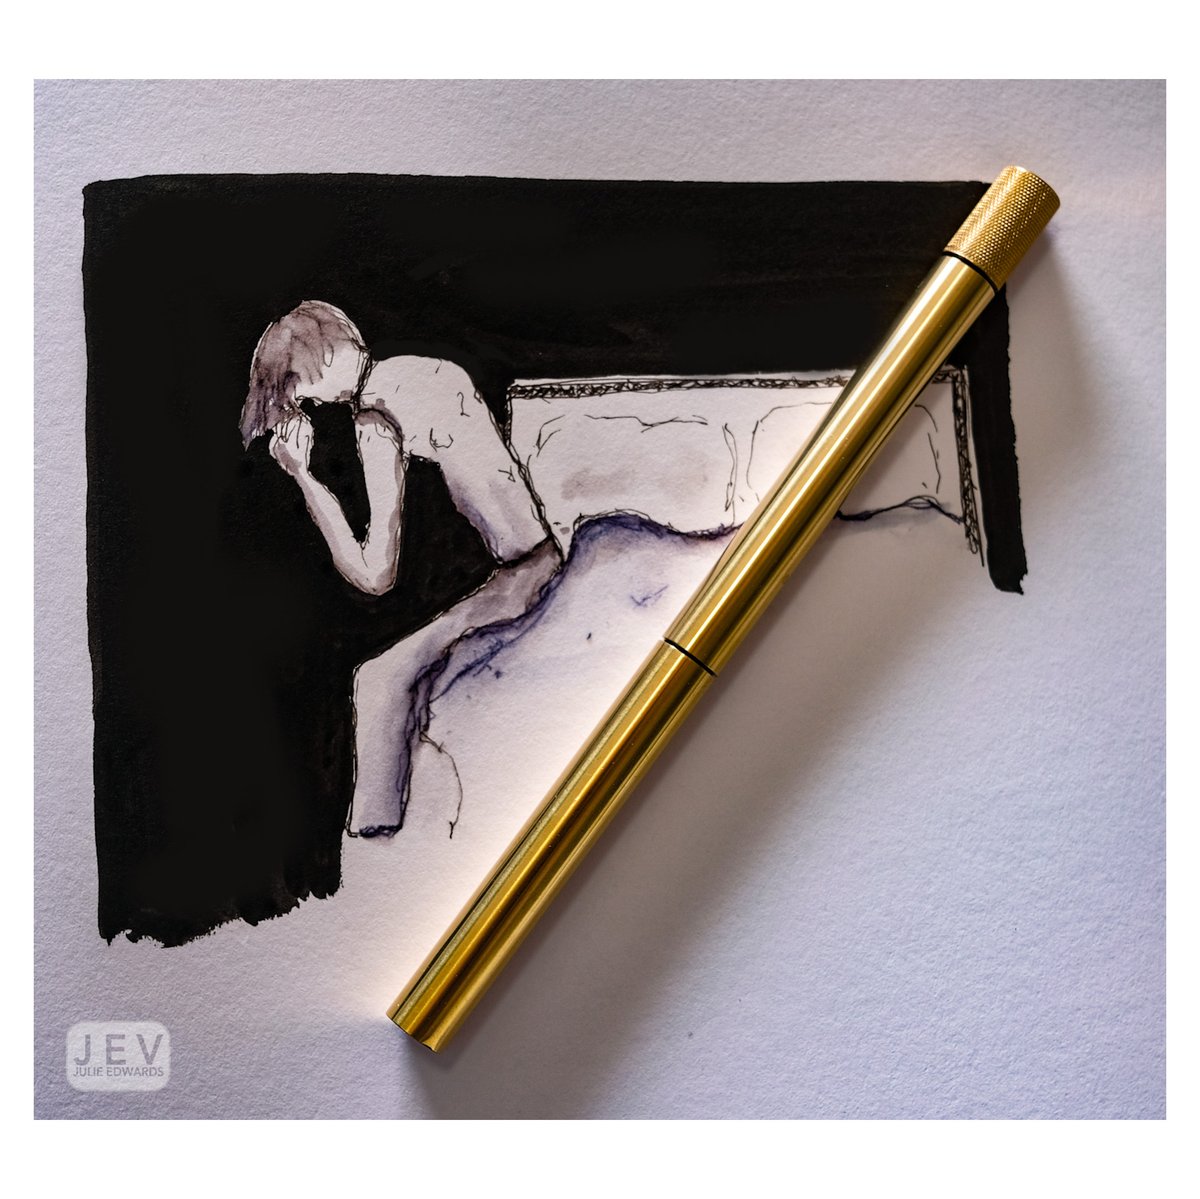 Enjoying a new self-treat - a @tomsstudio #limitededition #brass #fineliner pen exploring some #illustration ideas #despair #inksketch drawn with black & constellation (purple) ink, adding the #indianink background after The #studiojev is open till 3pm @eastbeachstudios today.